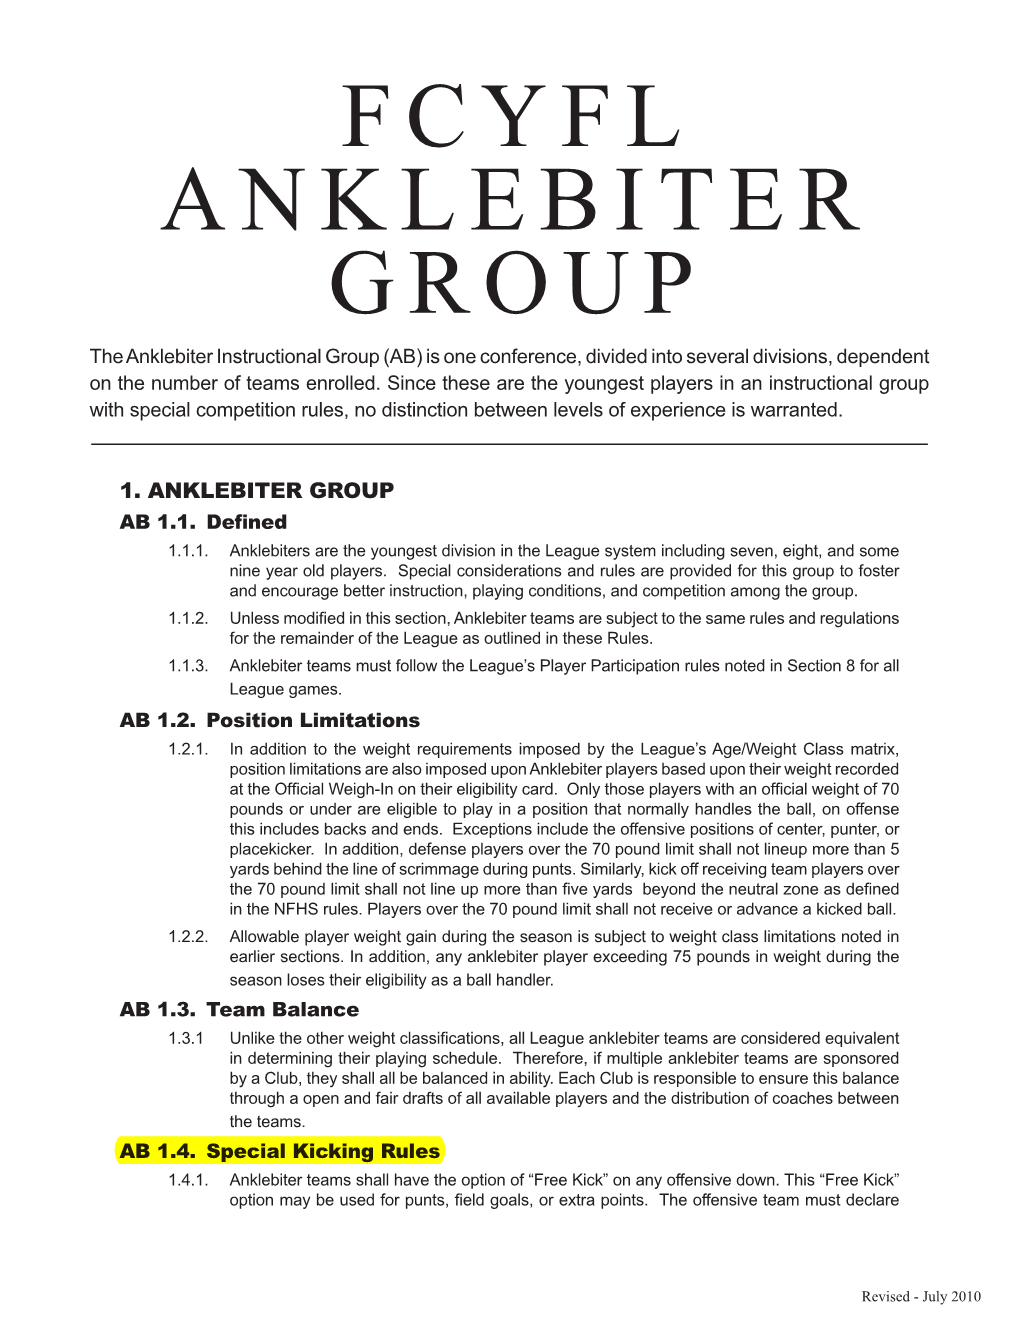 FCYFL ANKLEBITER GROUP the Anklebiter Instructional Group (AB) Is One Conference, Divided Into Several Divisions, Dependent on the Number of Teams Enrolled